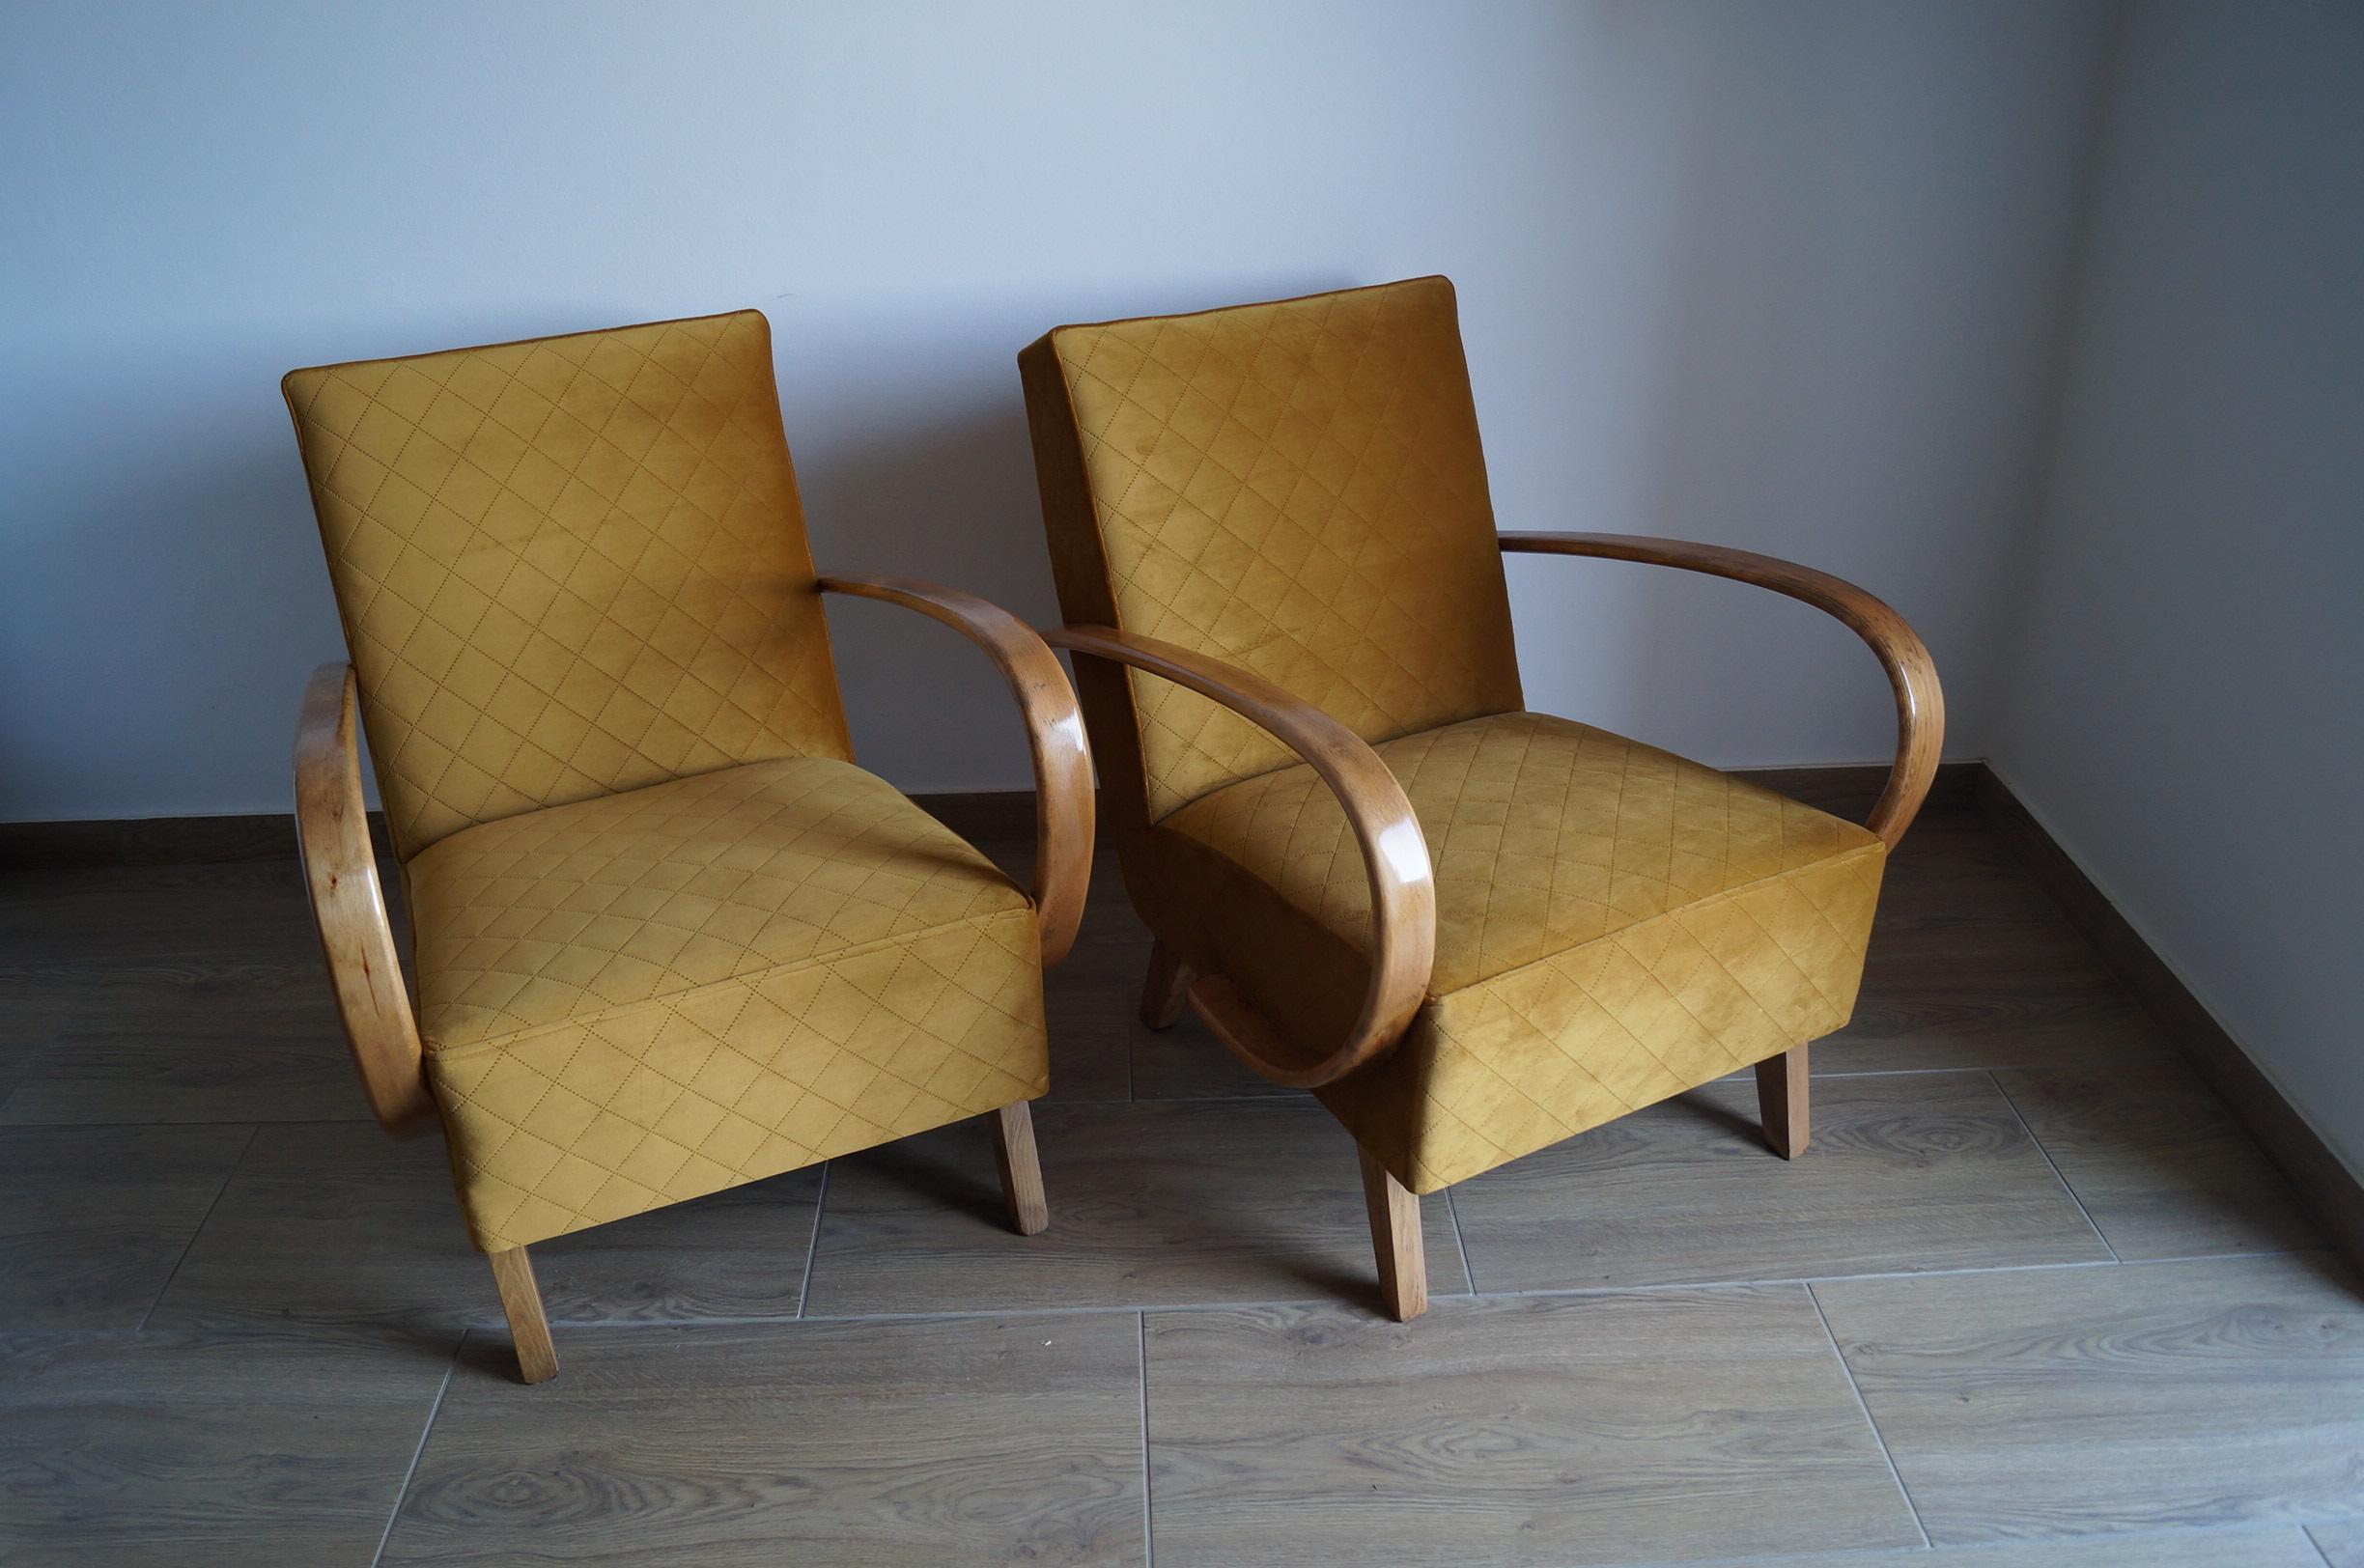 Two Art Deco armchair from 1940 Czech Republic.
Designed by a famous Czech designer Jindrich Halabala, (a Czech designer ranked among the most outstanding creators of the modern period. The peak of his career fell on the 1930s and 1940s when he